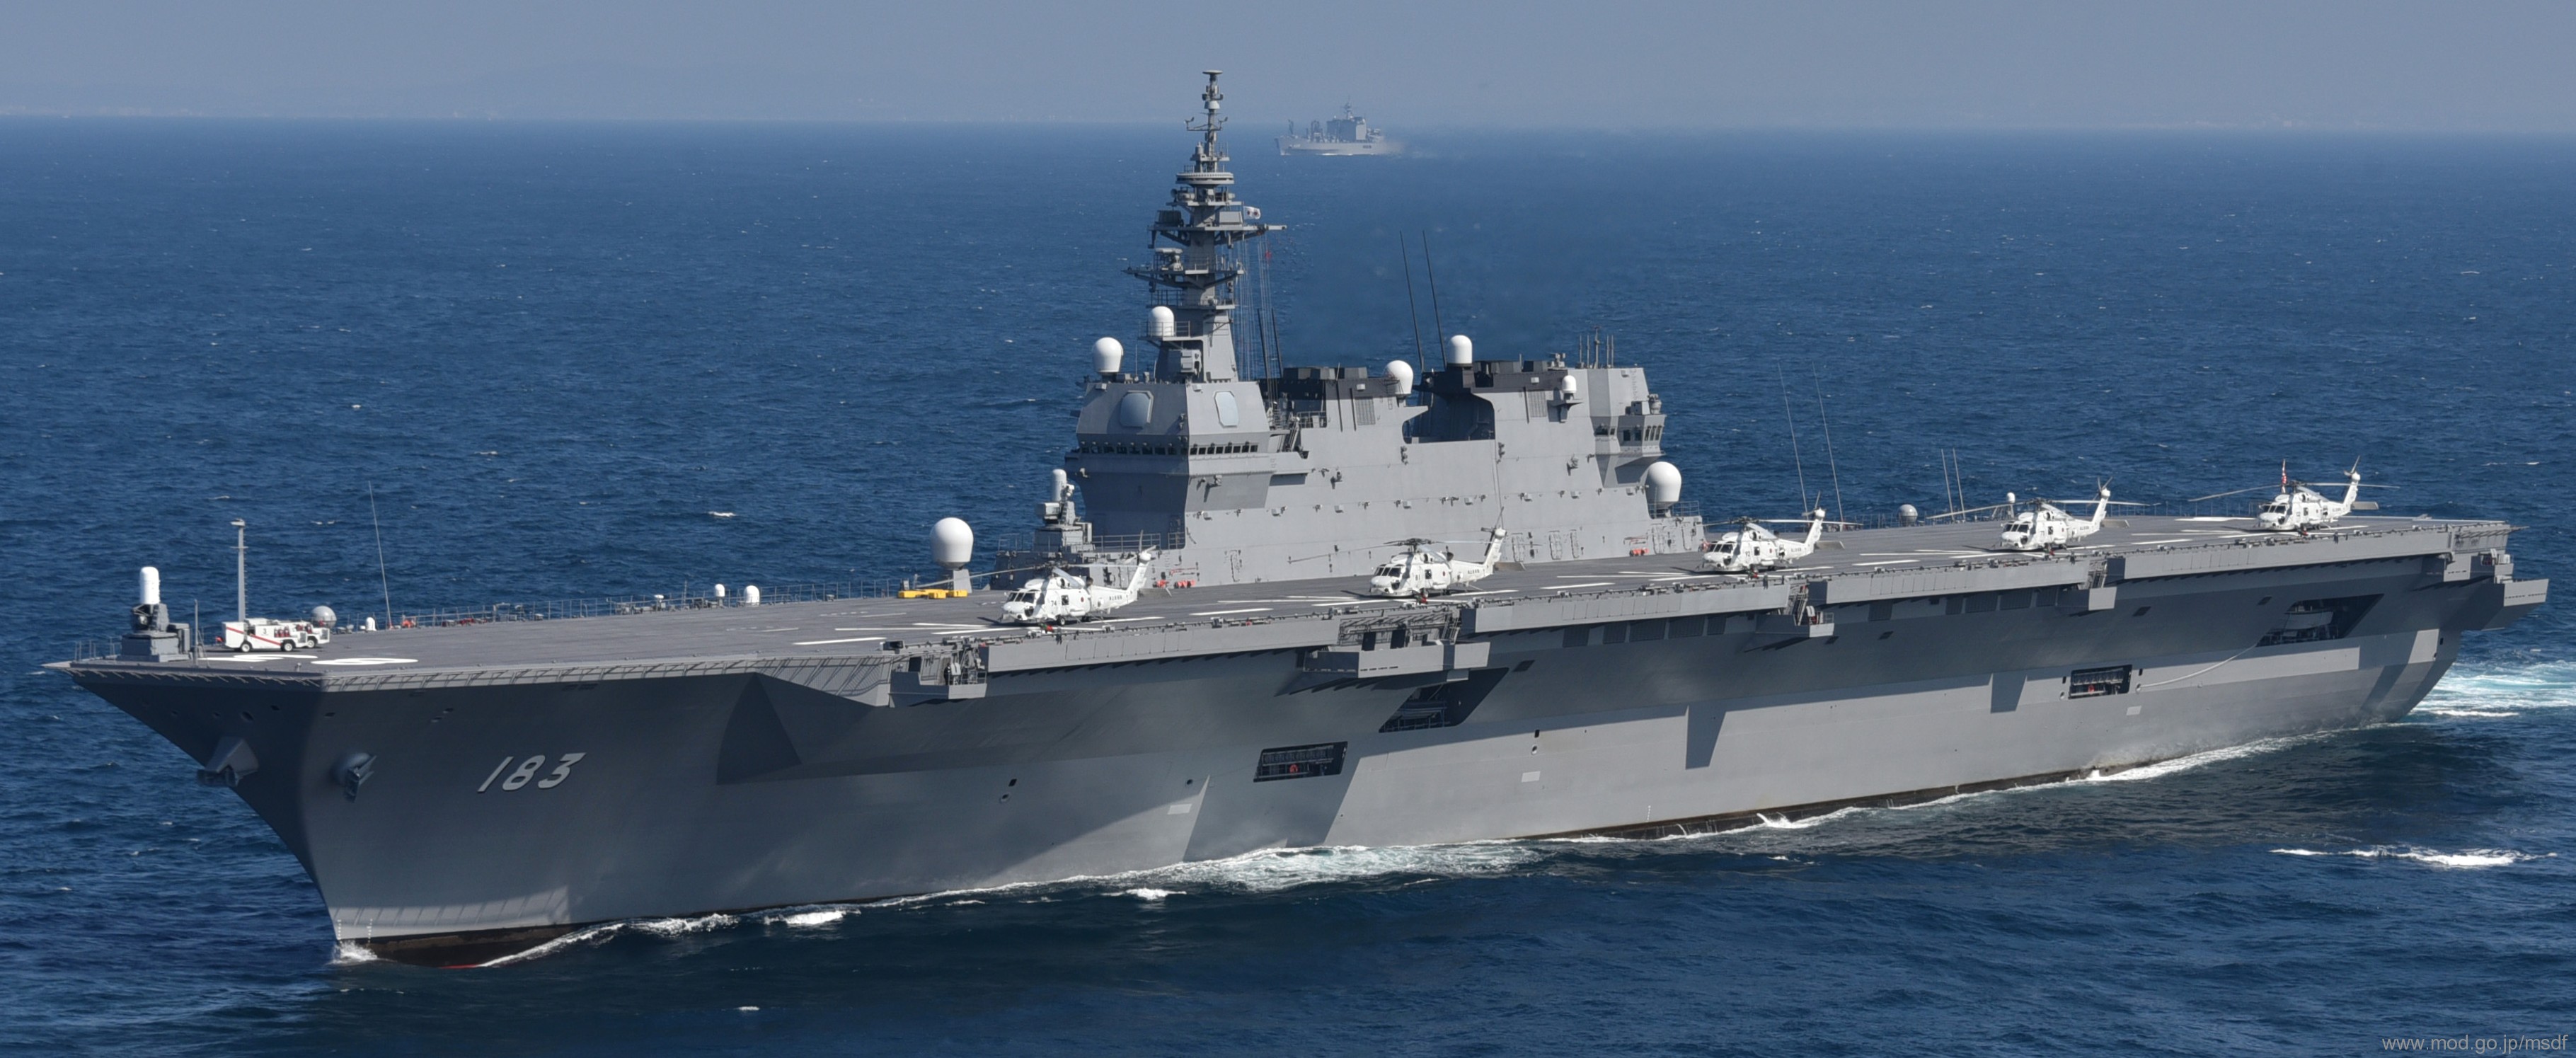 ddh-183 js izumo class helicopter destroyer japan maritime self defense force jmsdf 13x ihi marine united aircraft carrier